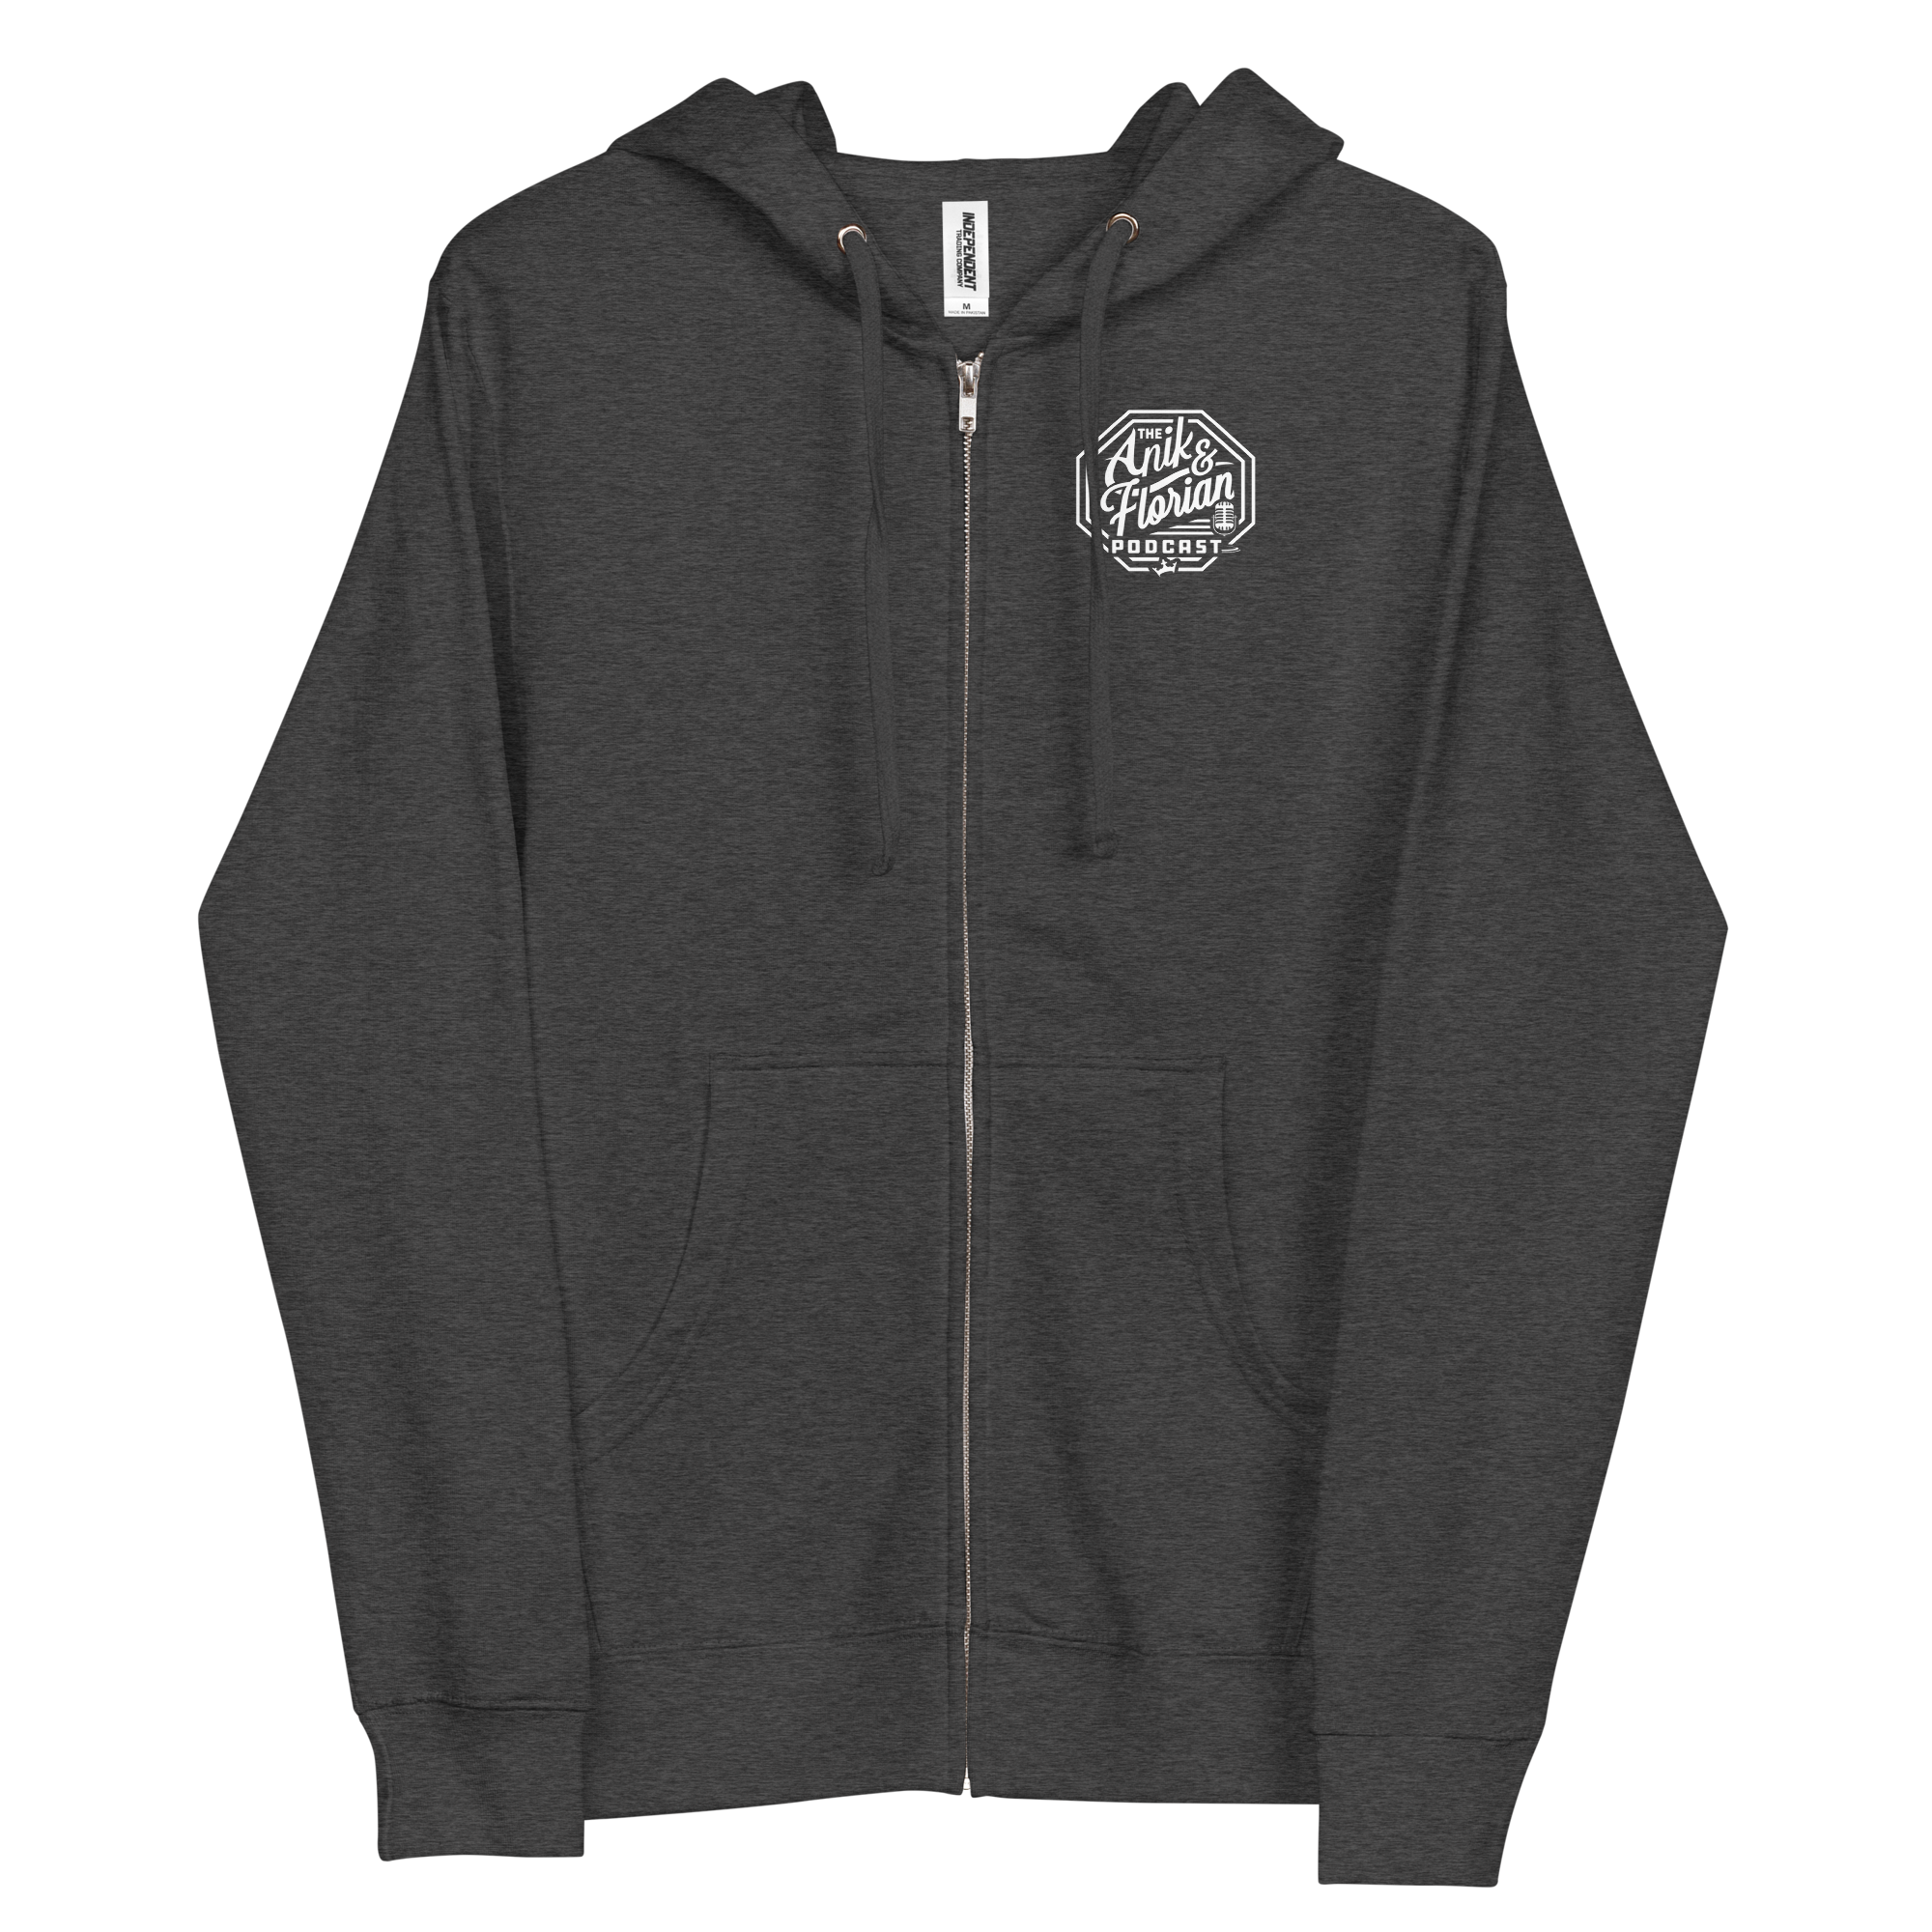 Jon Anik & Kenny Florian Podcast Zip Up Embroidered Logo Hoodie in Charcoal Heather Grey